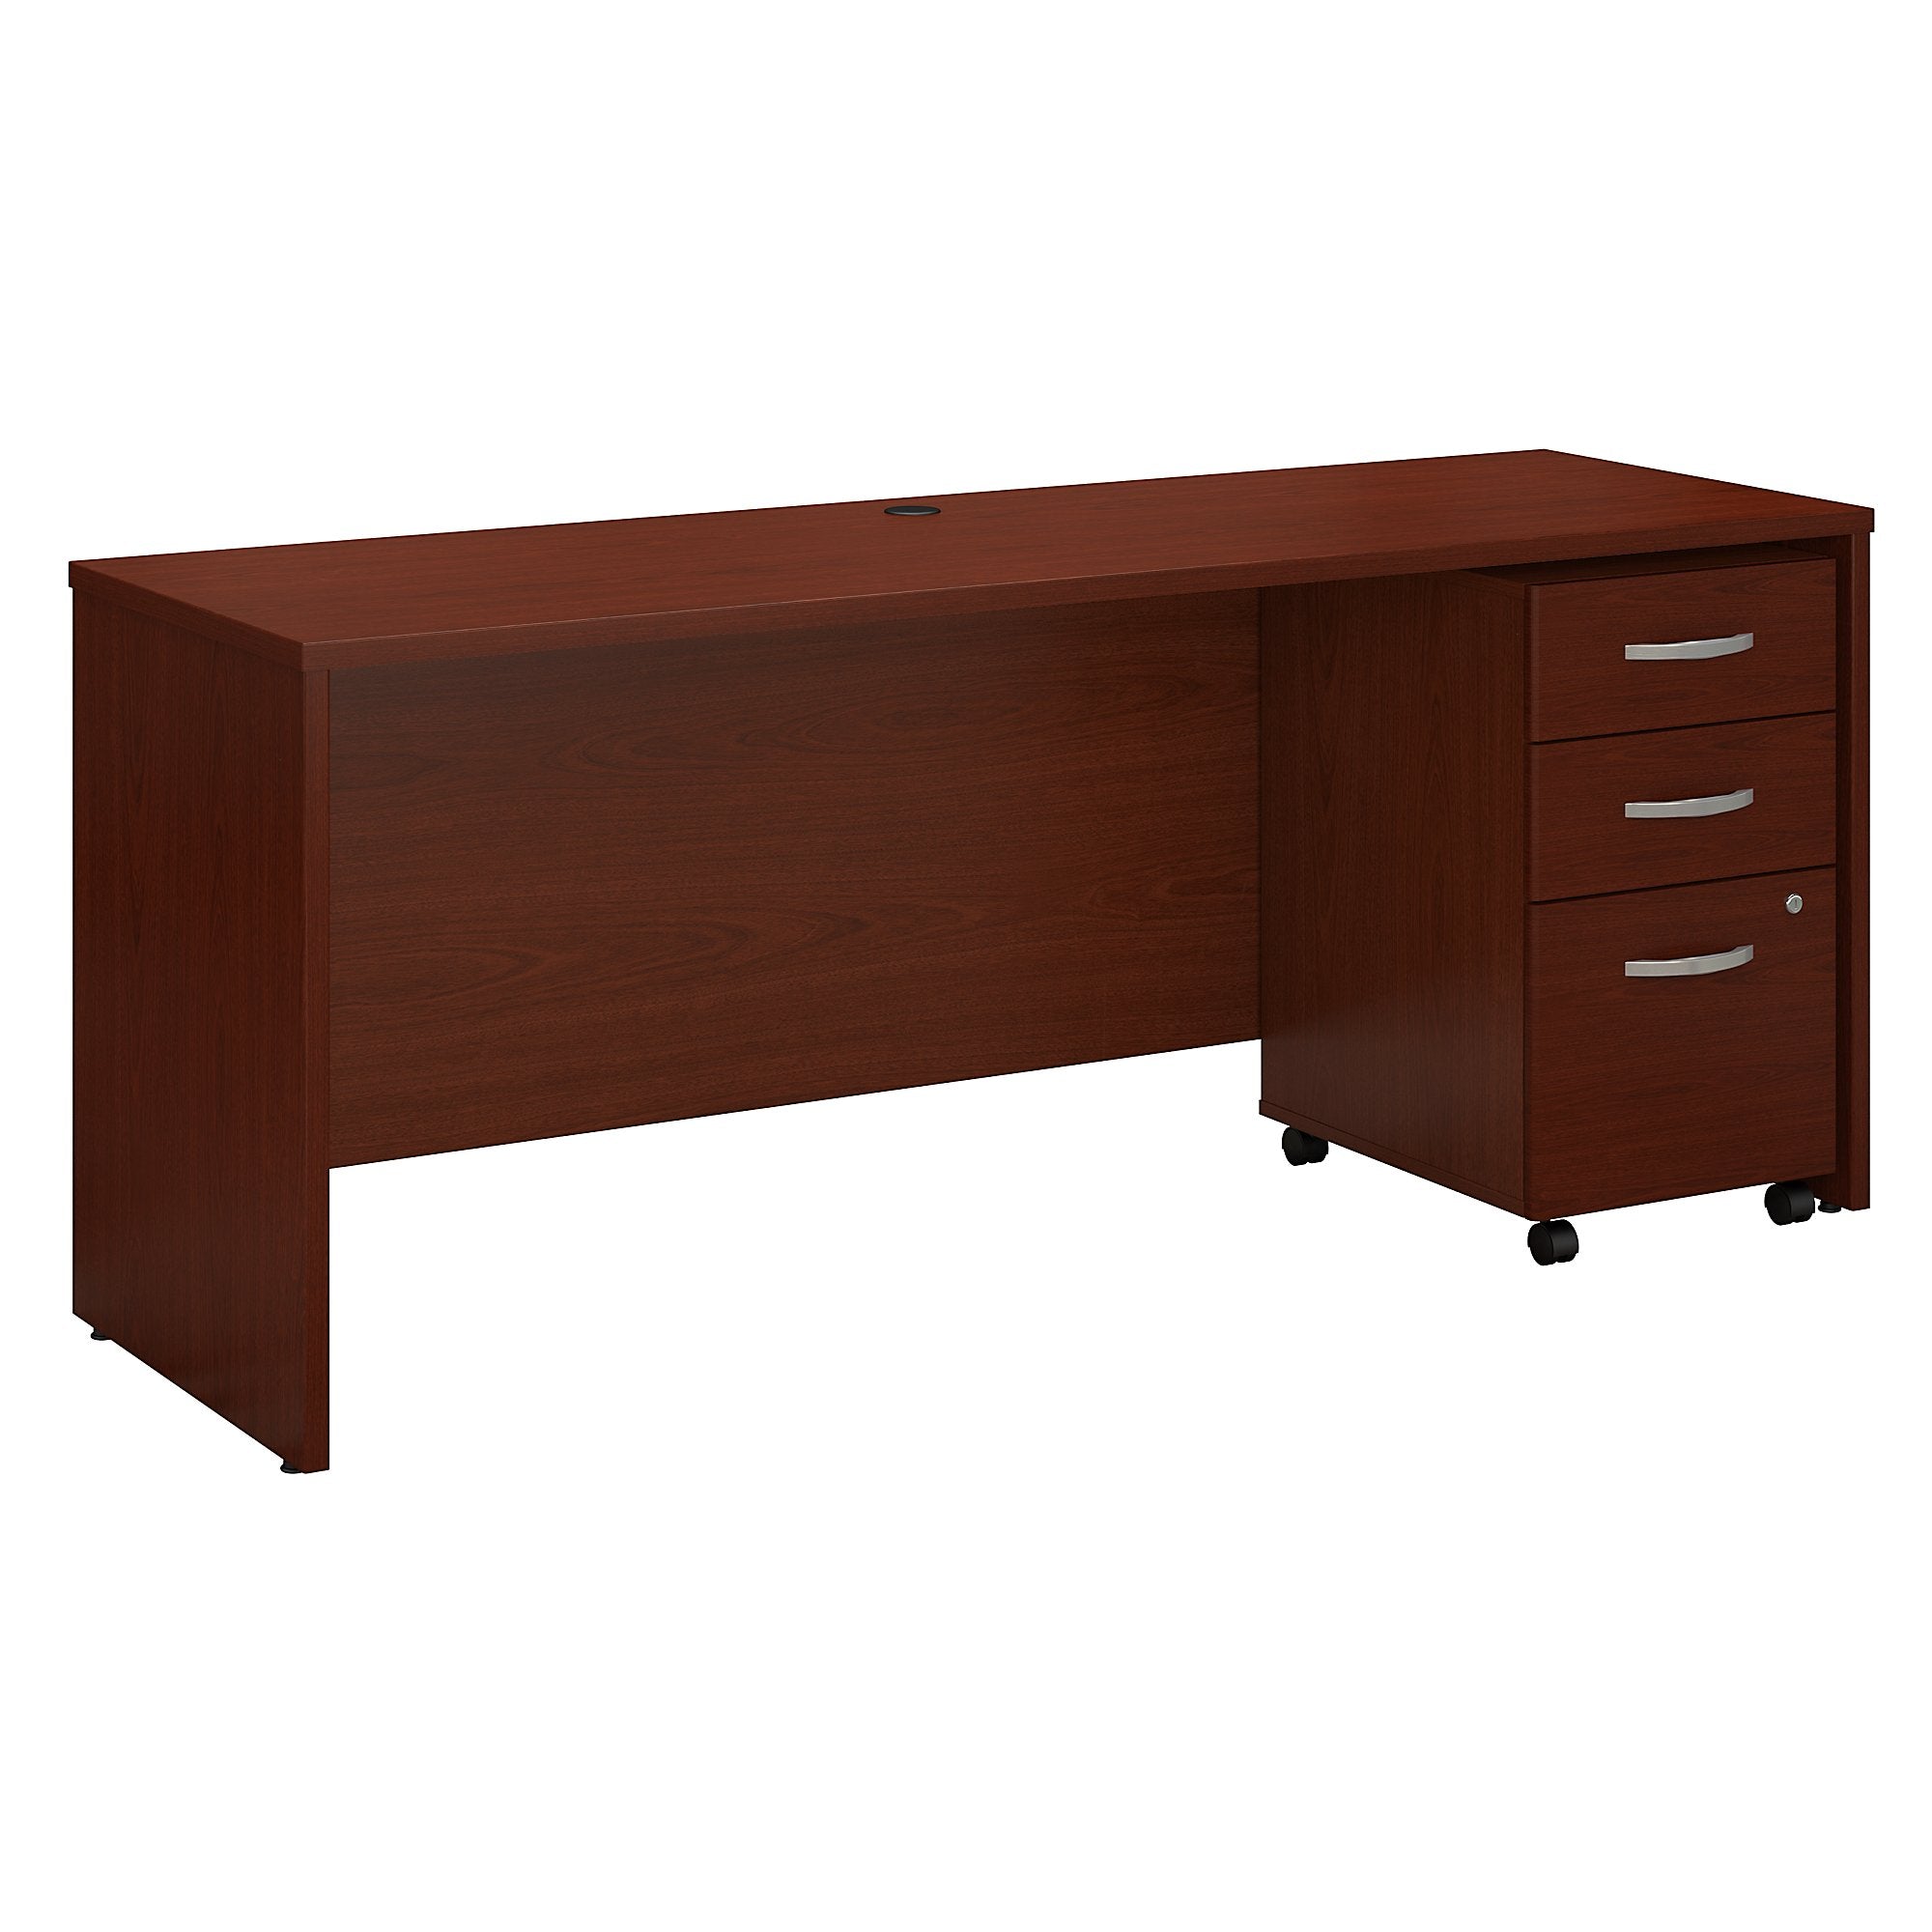 Bush Business Furniture Series C 72W x 24D Office Desk with Mobile File Cabinet | Mahogany